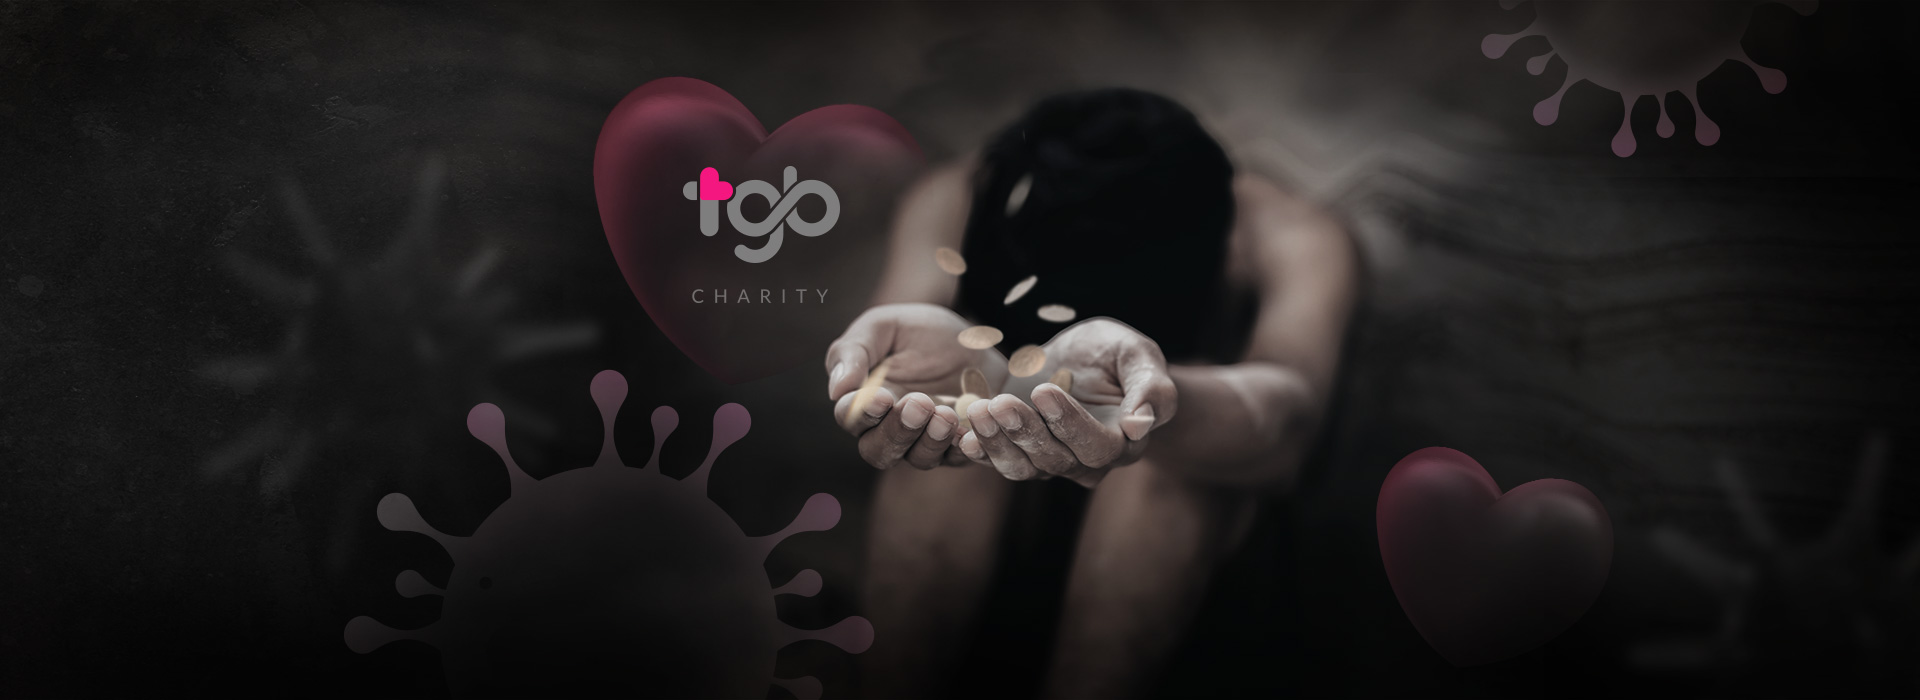 TGB Charity - 1/10 charities could be forced to close due to Covid-19 crisis